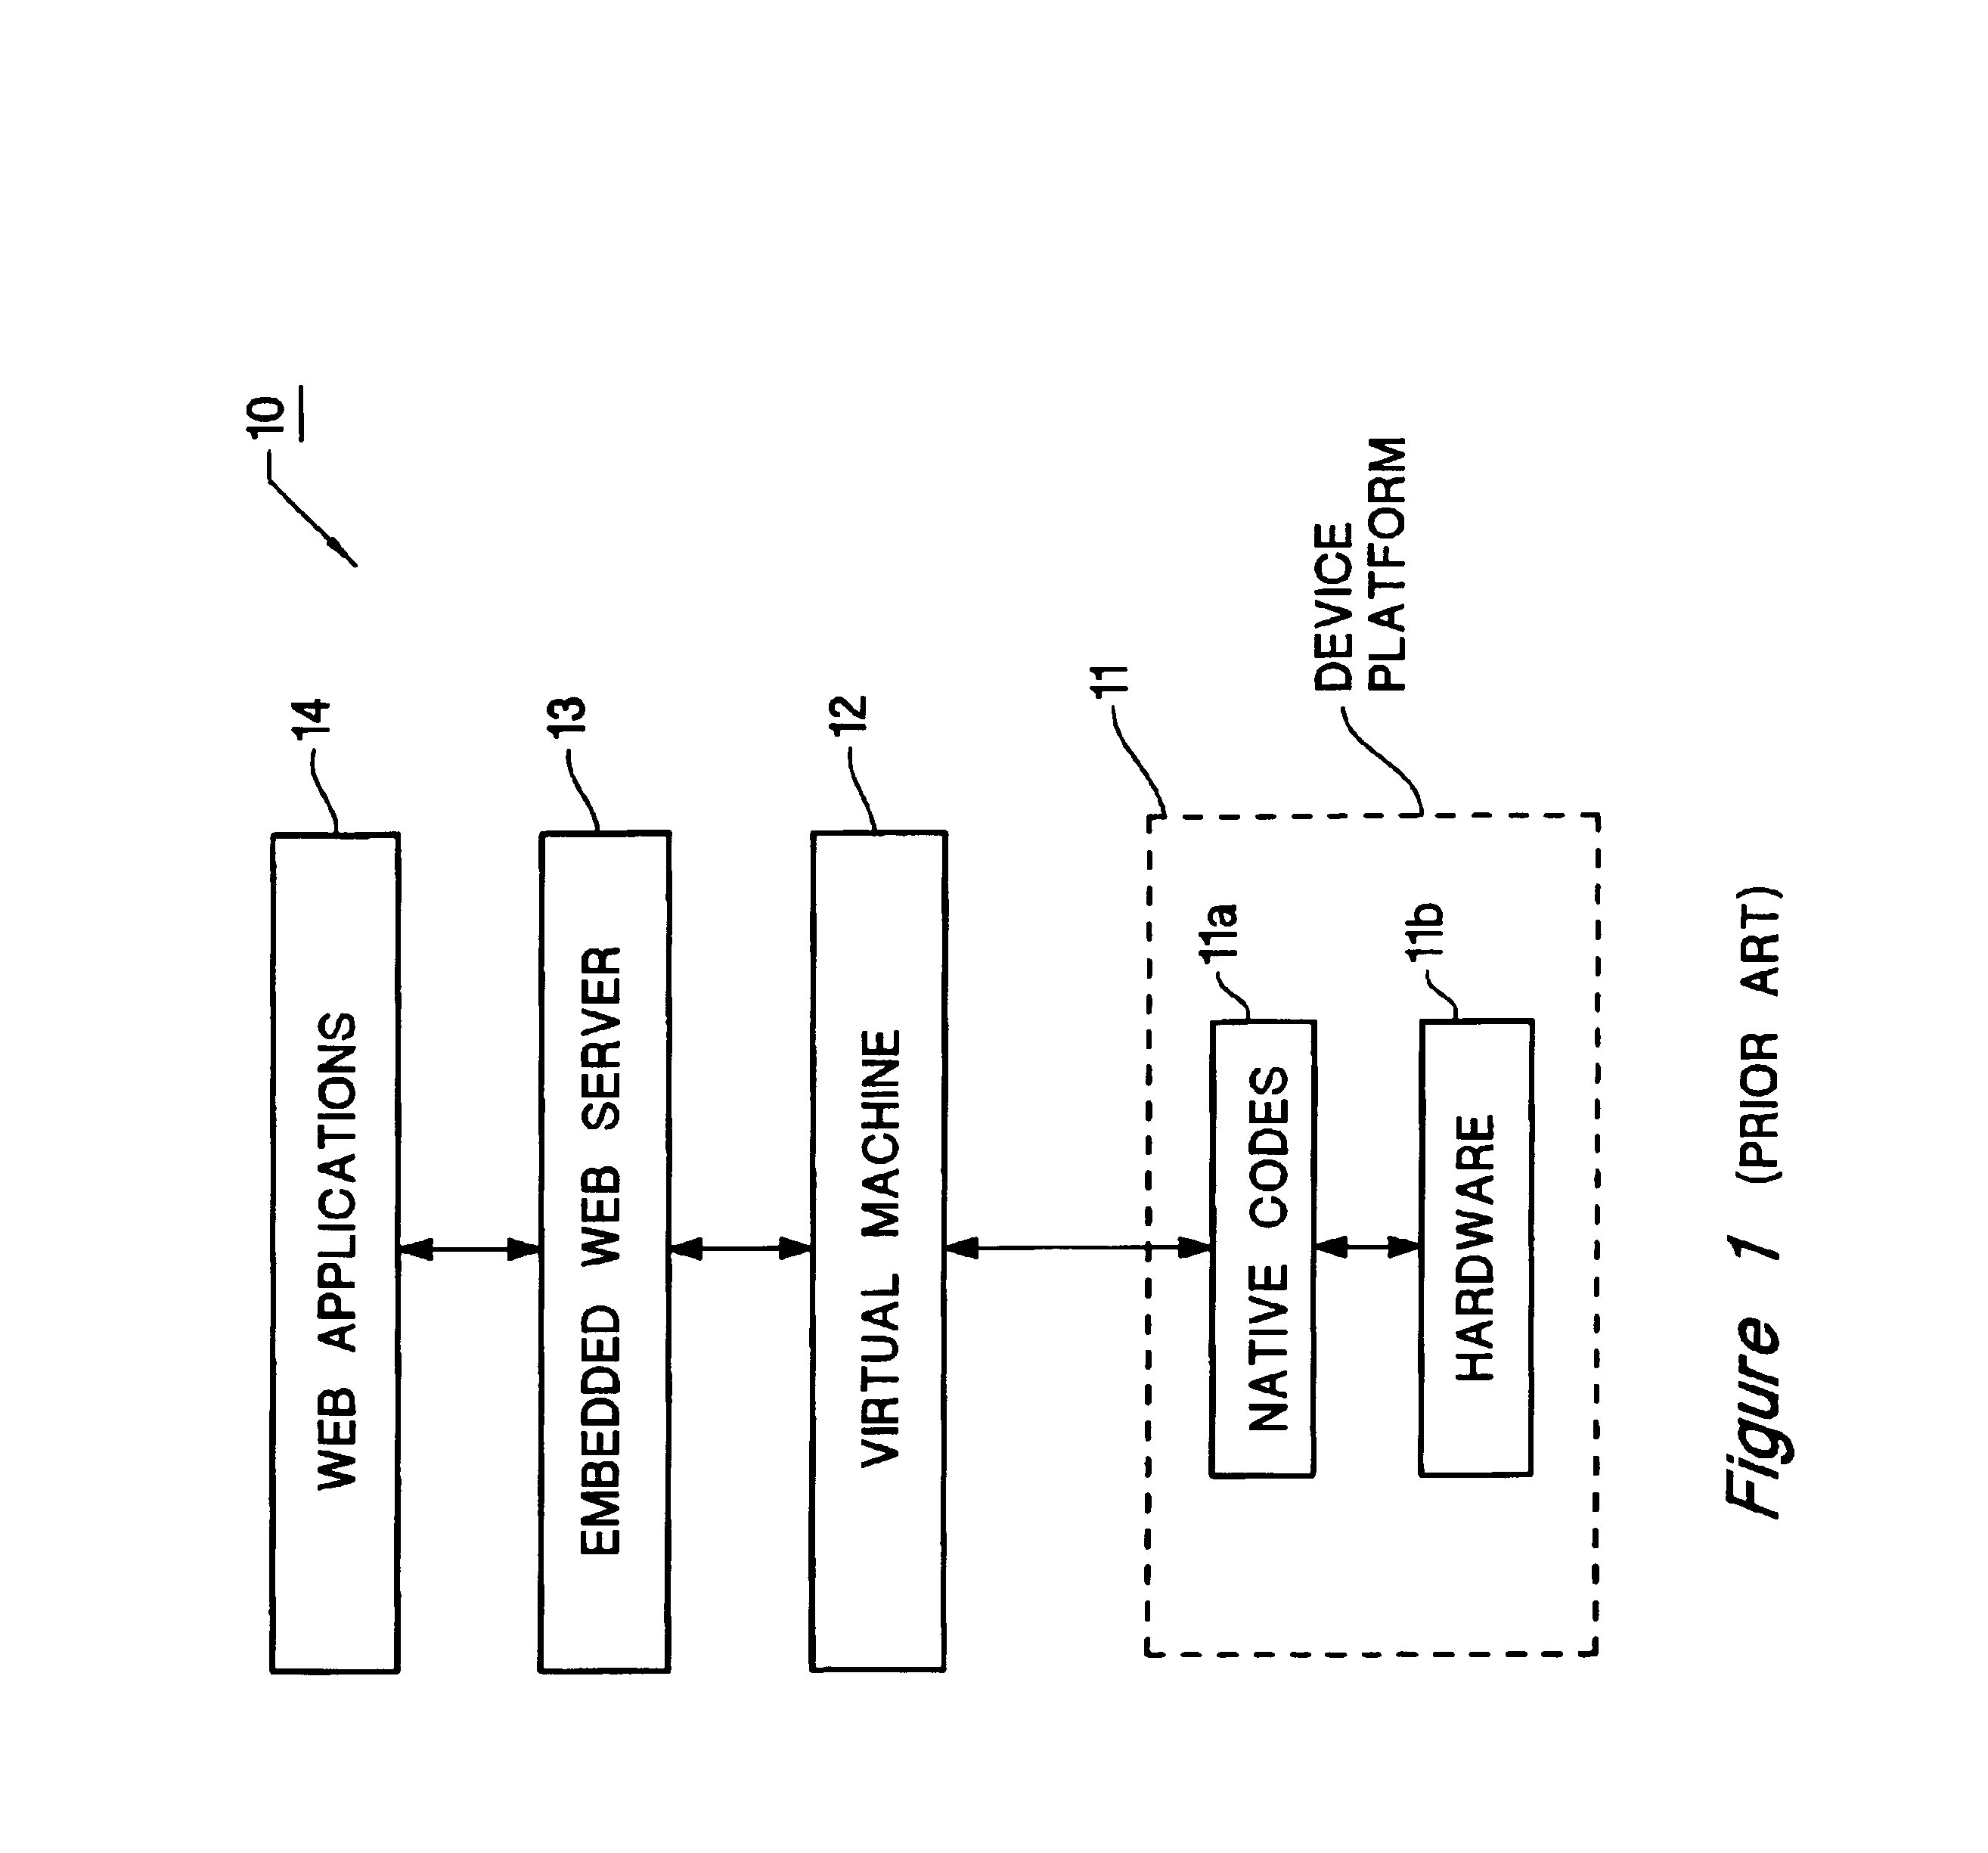 Providing an embedded application specific web server